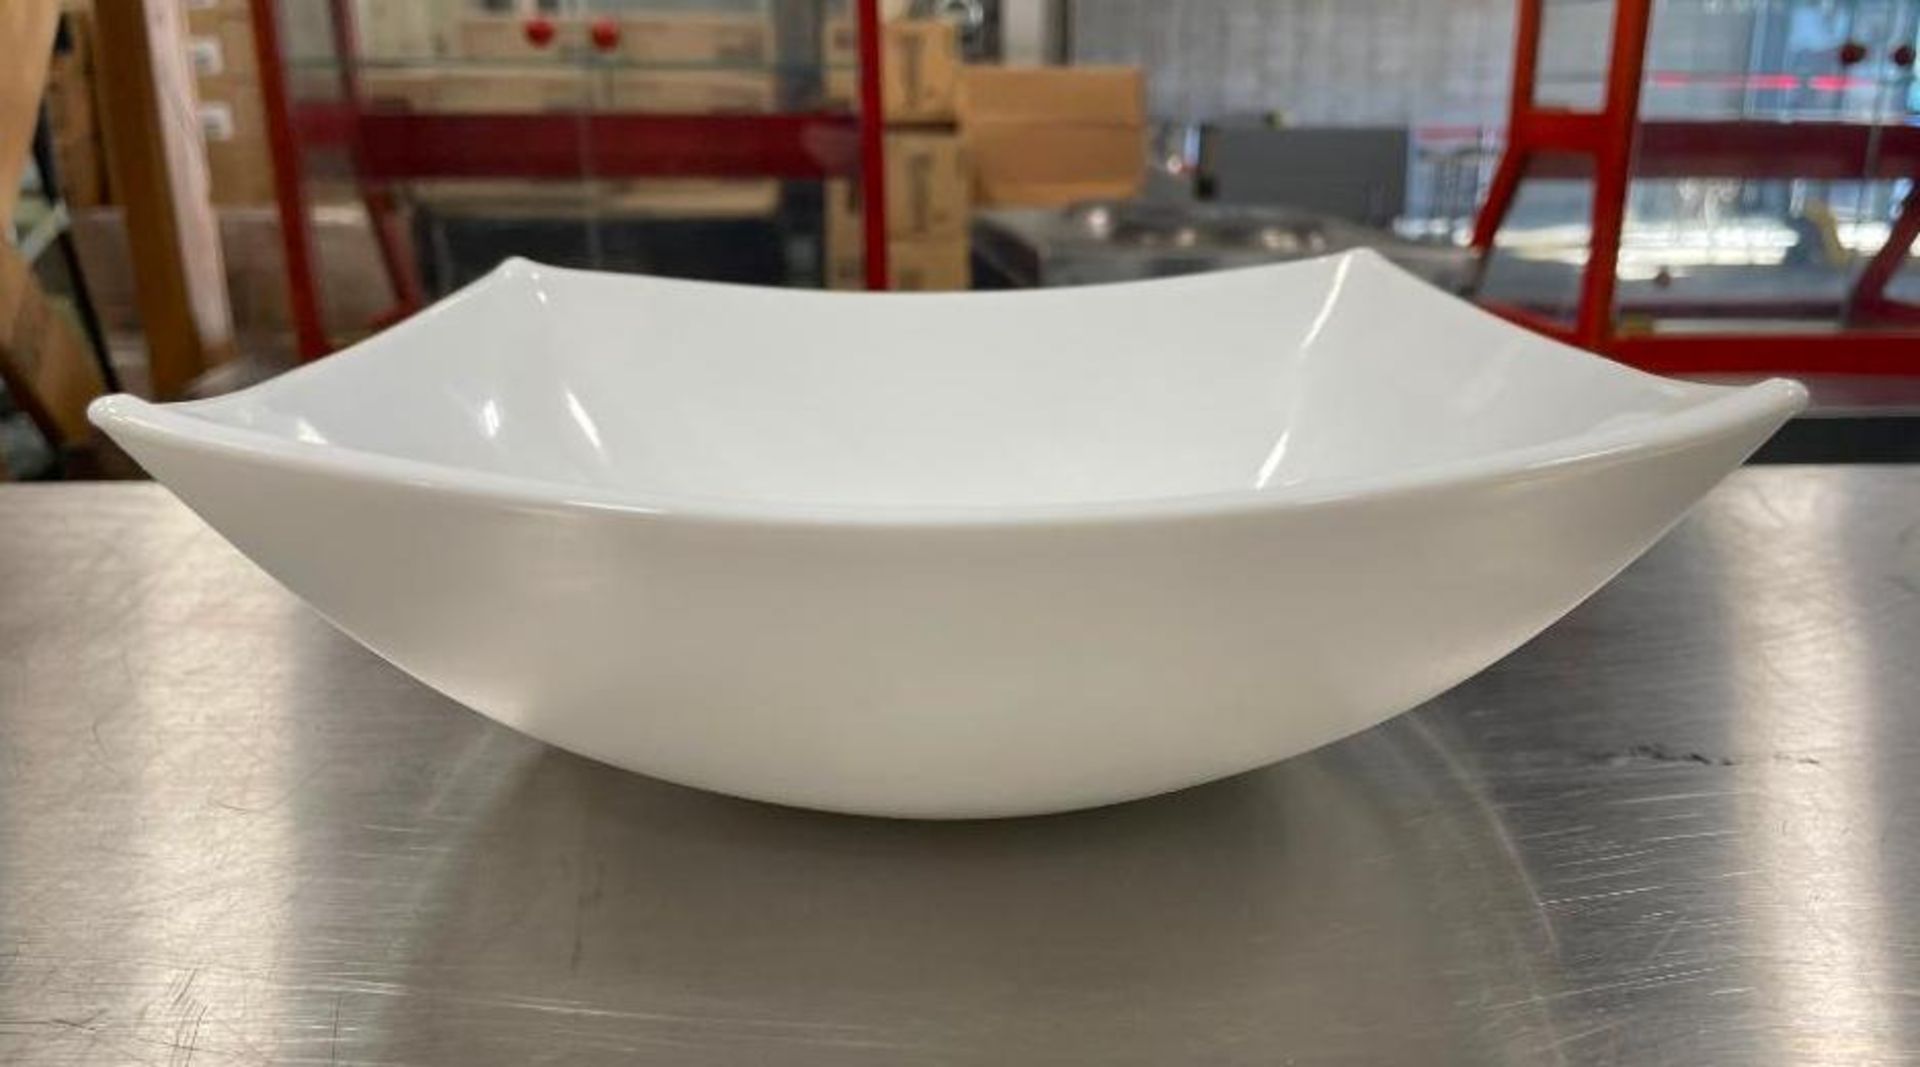 4 CASES OF 9 3/8" DELICE WHITE GLASS BOWLS, 57OZ/1.7L - CASE OF 6, ARCOROC C9860 - NEW - Image 4 of 6